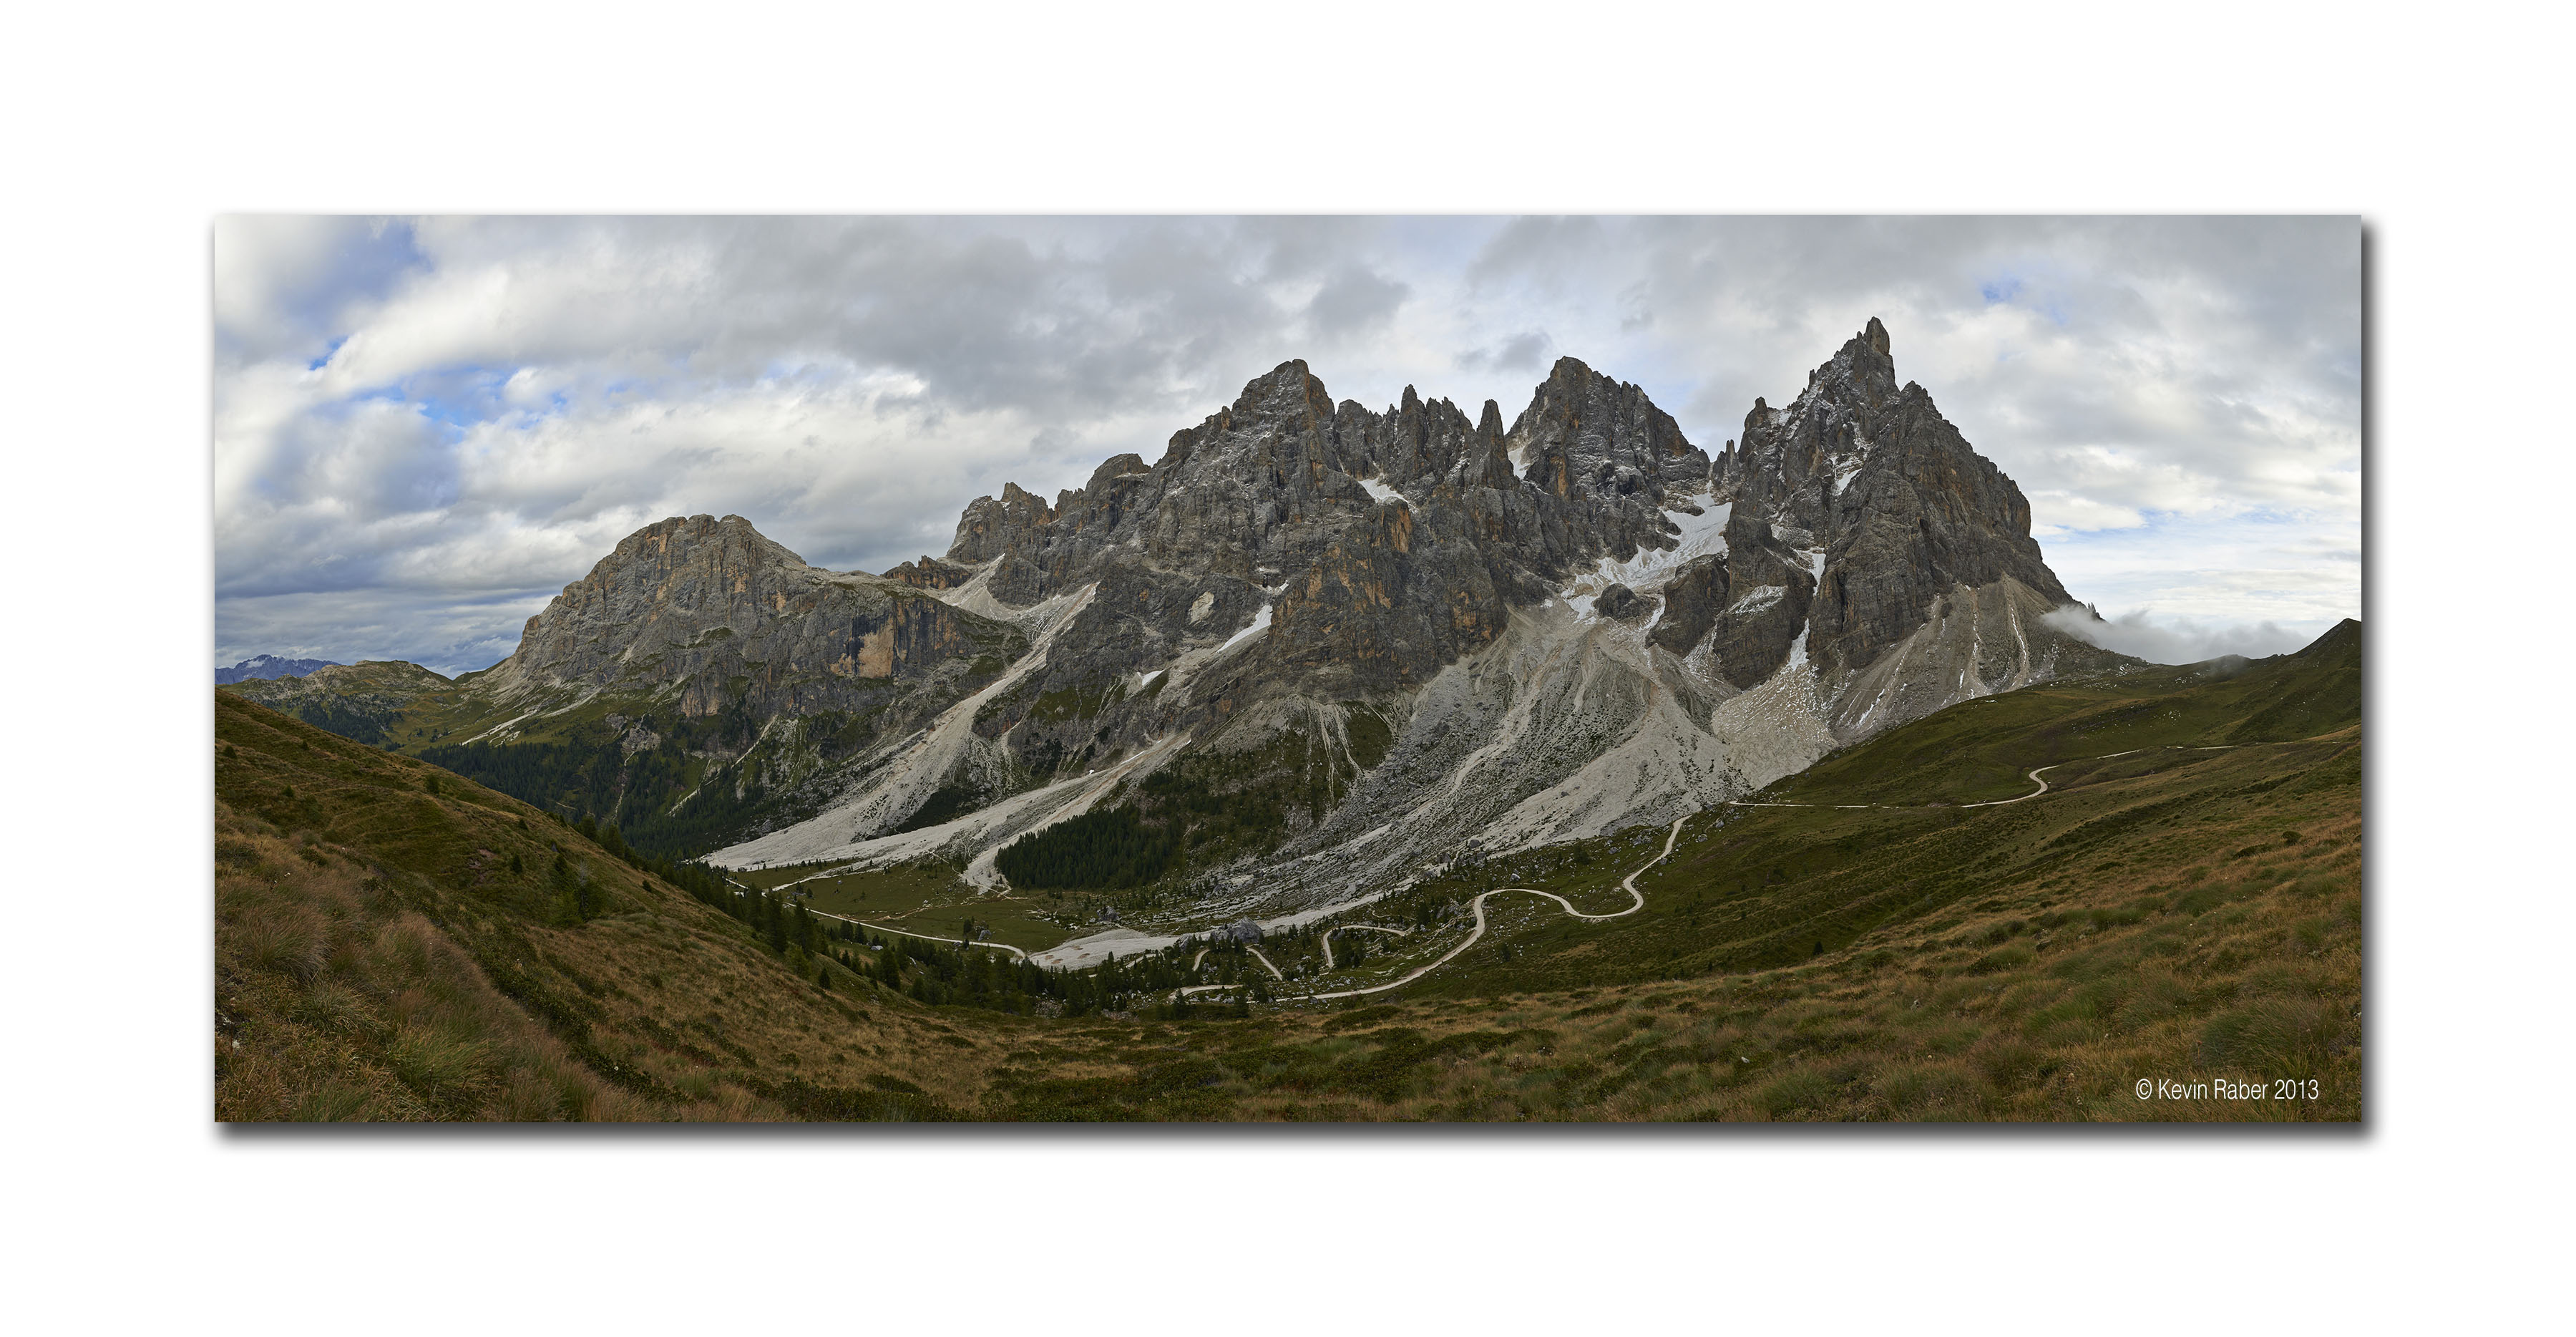 A fifty image stitch pano of one of the majestic Dolomite Mountains